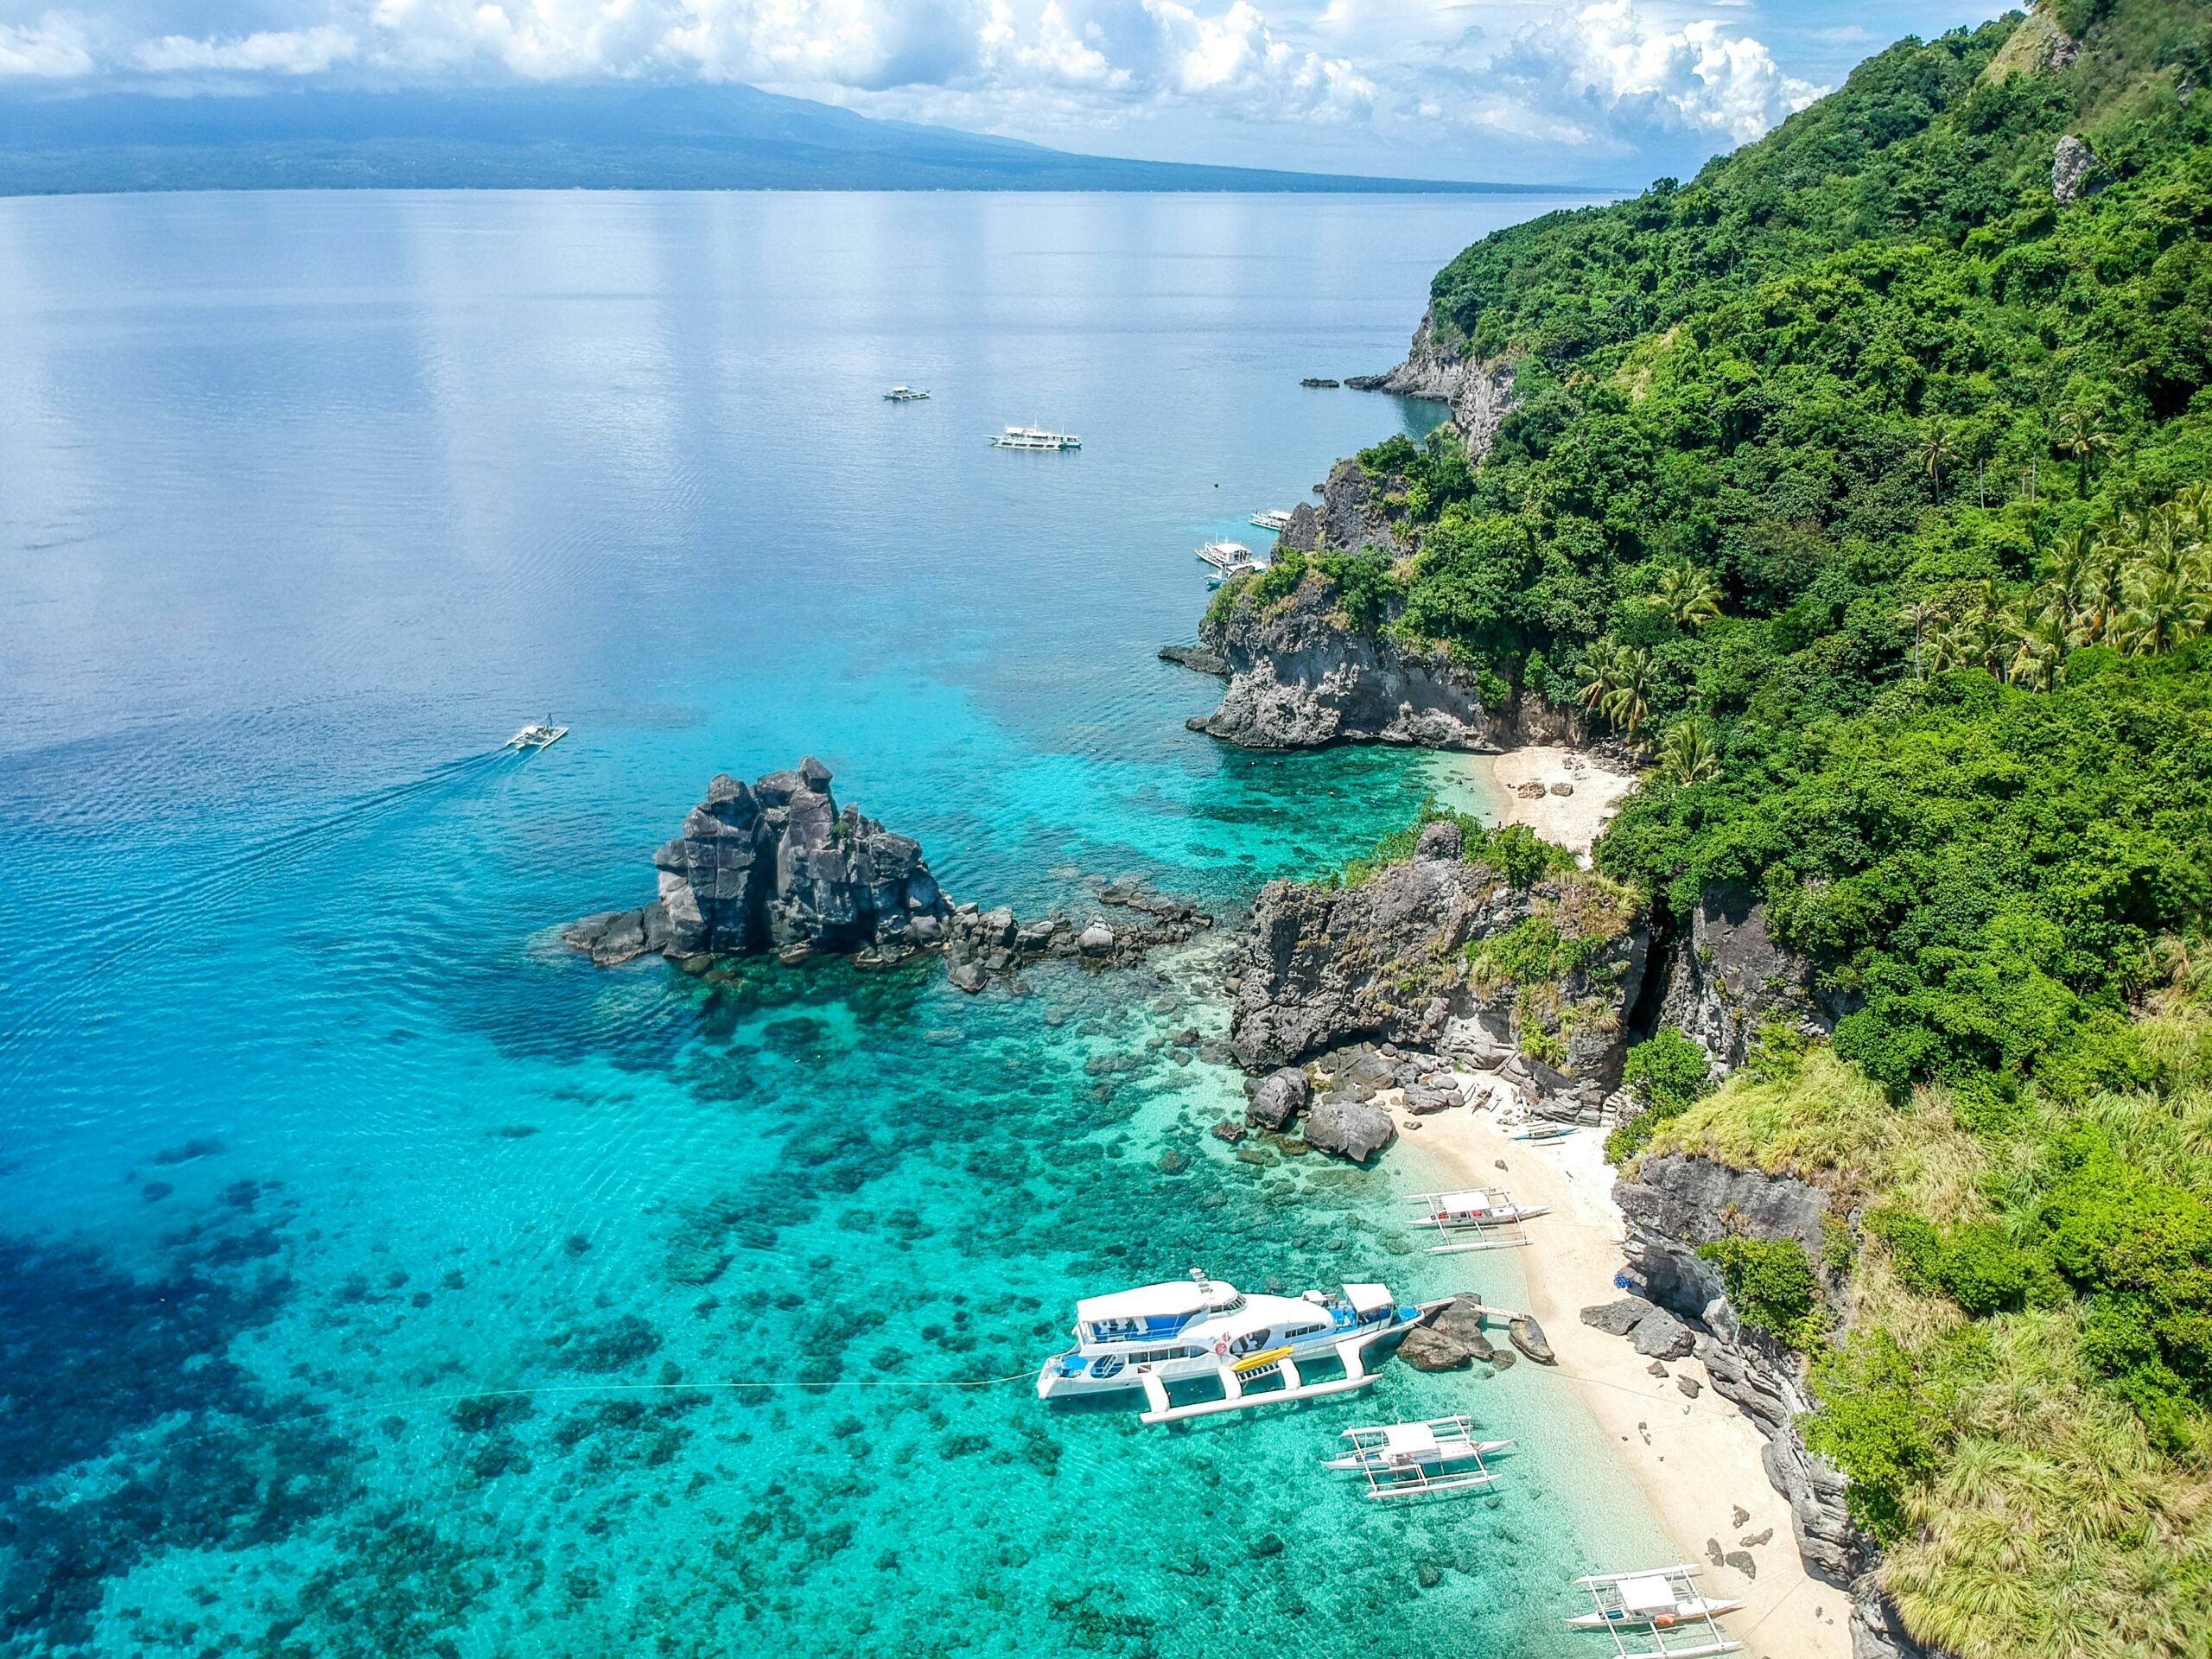 Scuba Diving and Snorkeling in the Philippines